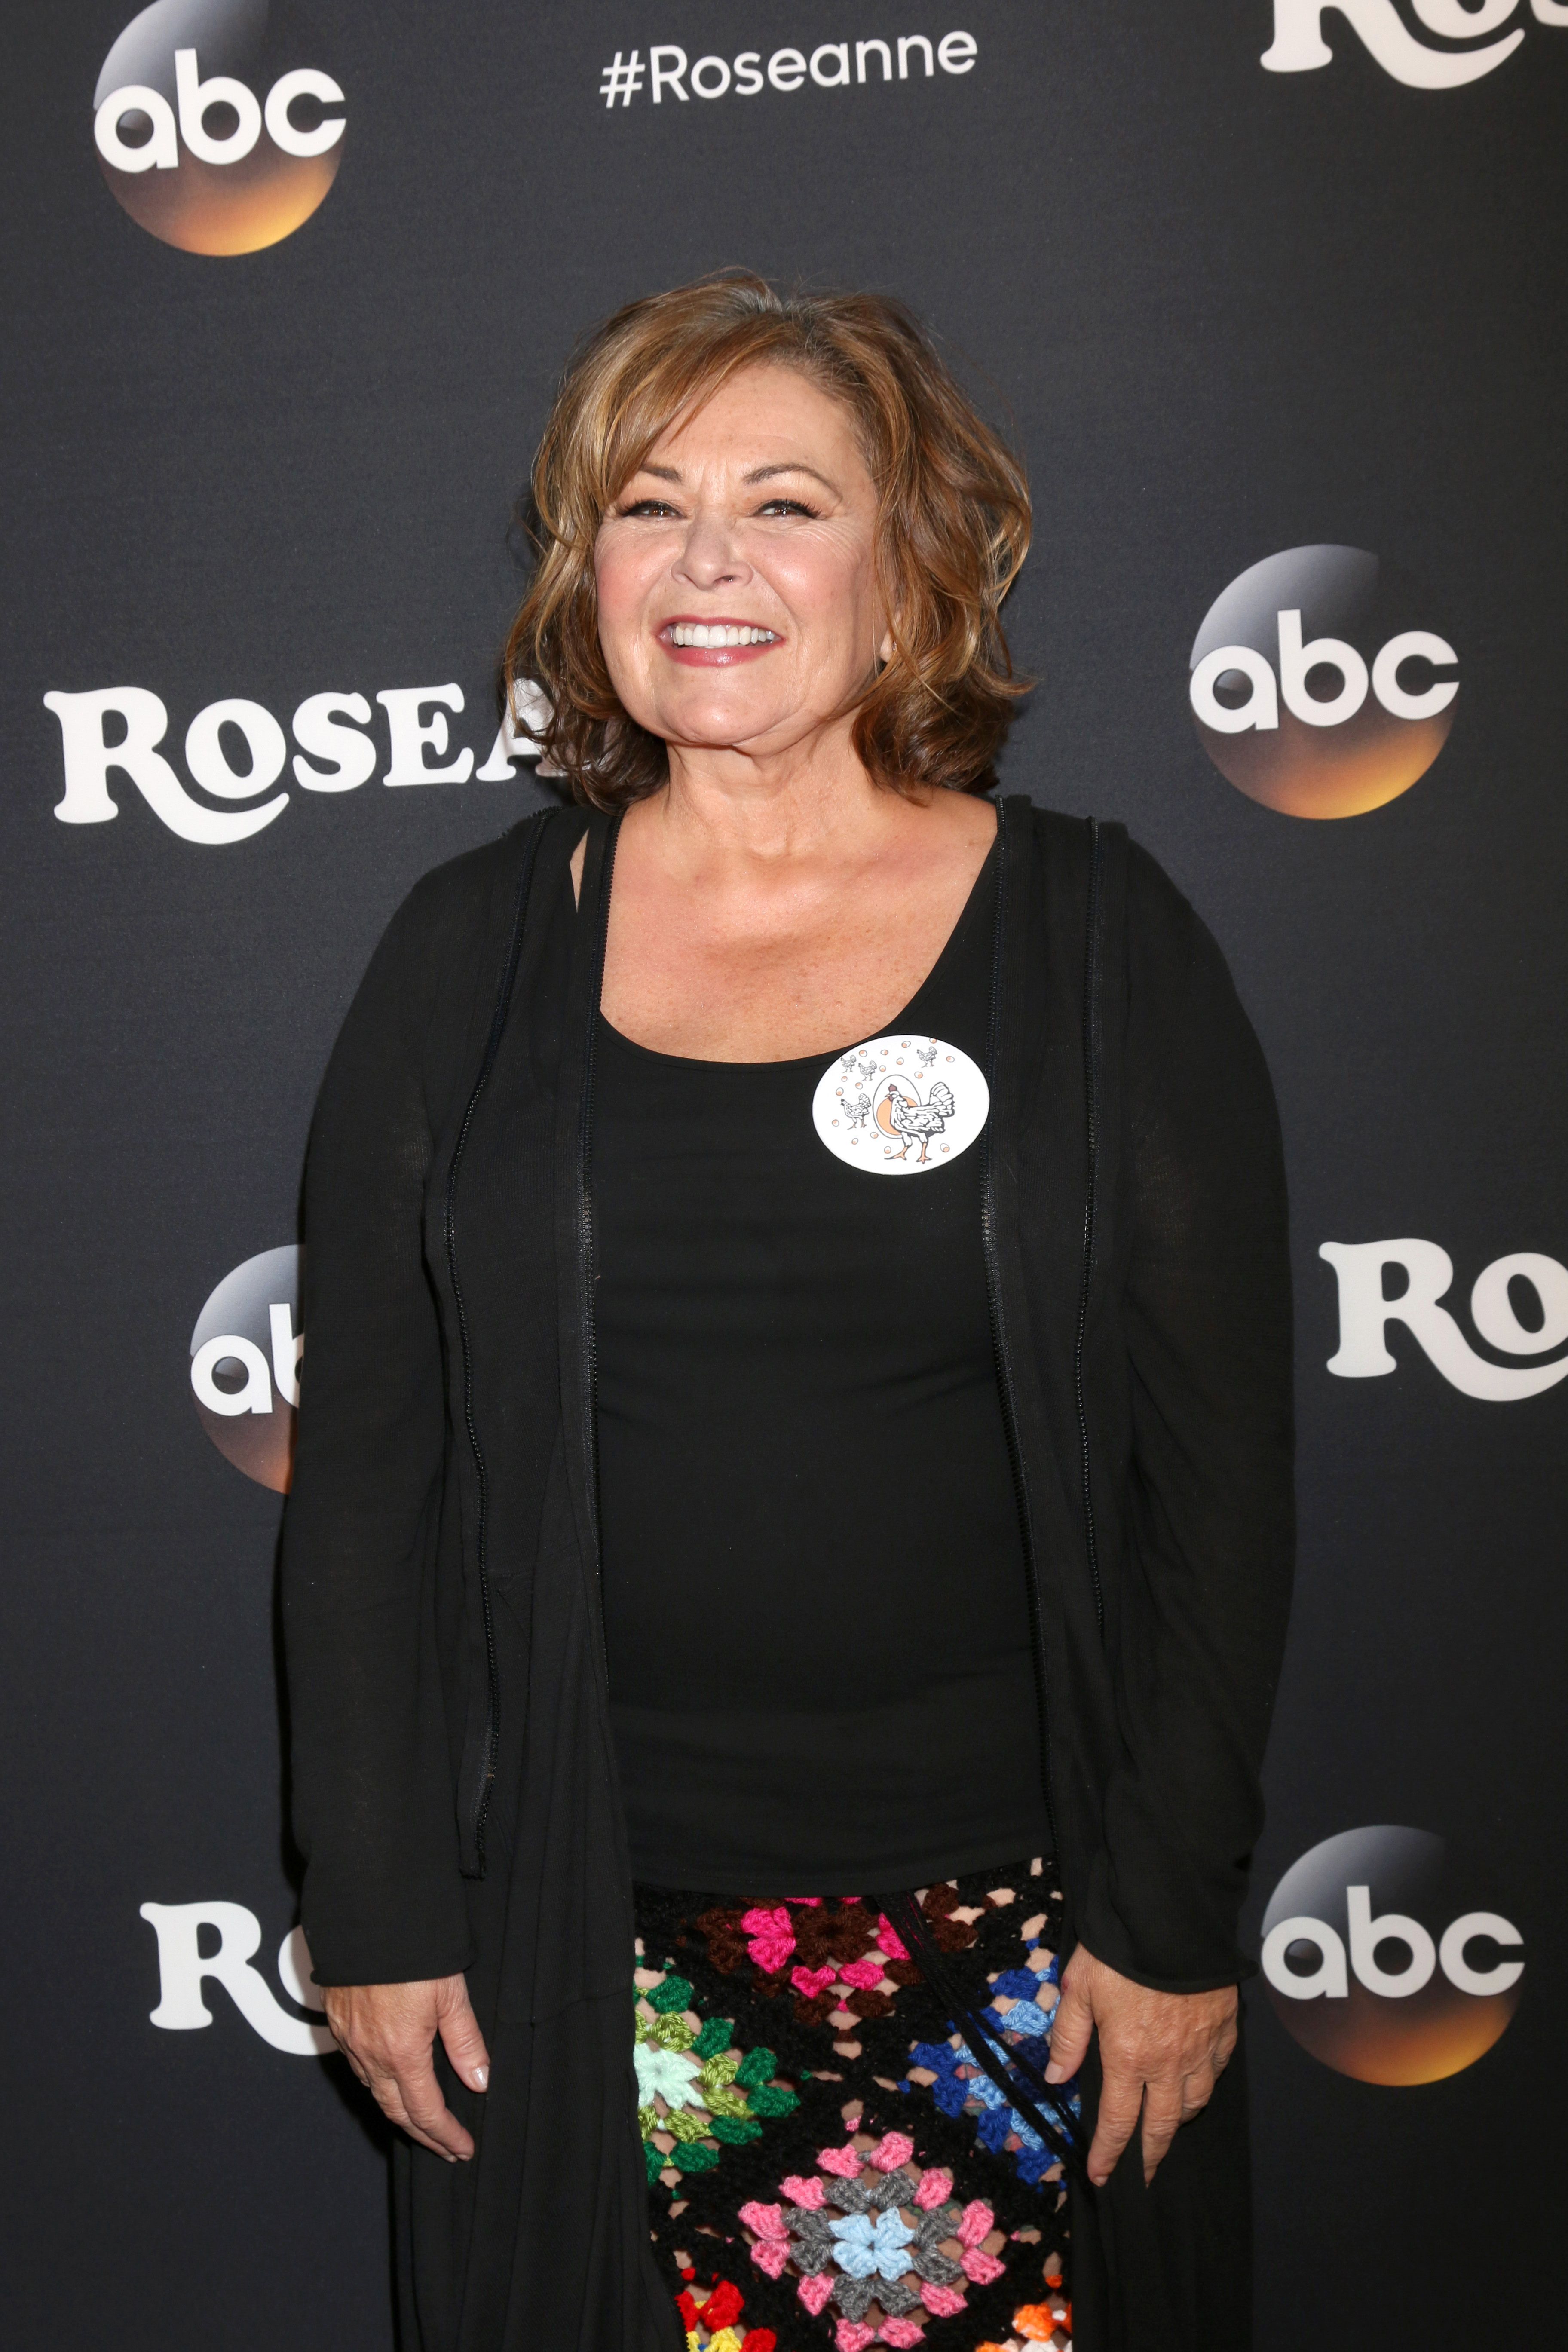 Roseanne Barr on the red carpet of her revived ABC sitcom, 'Roseanne.'